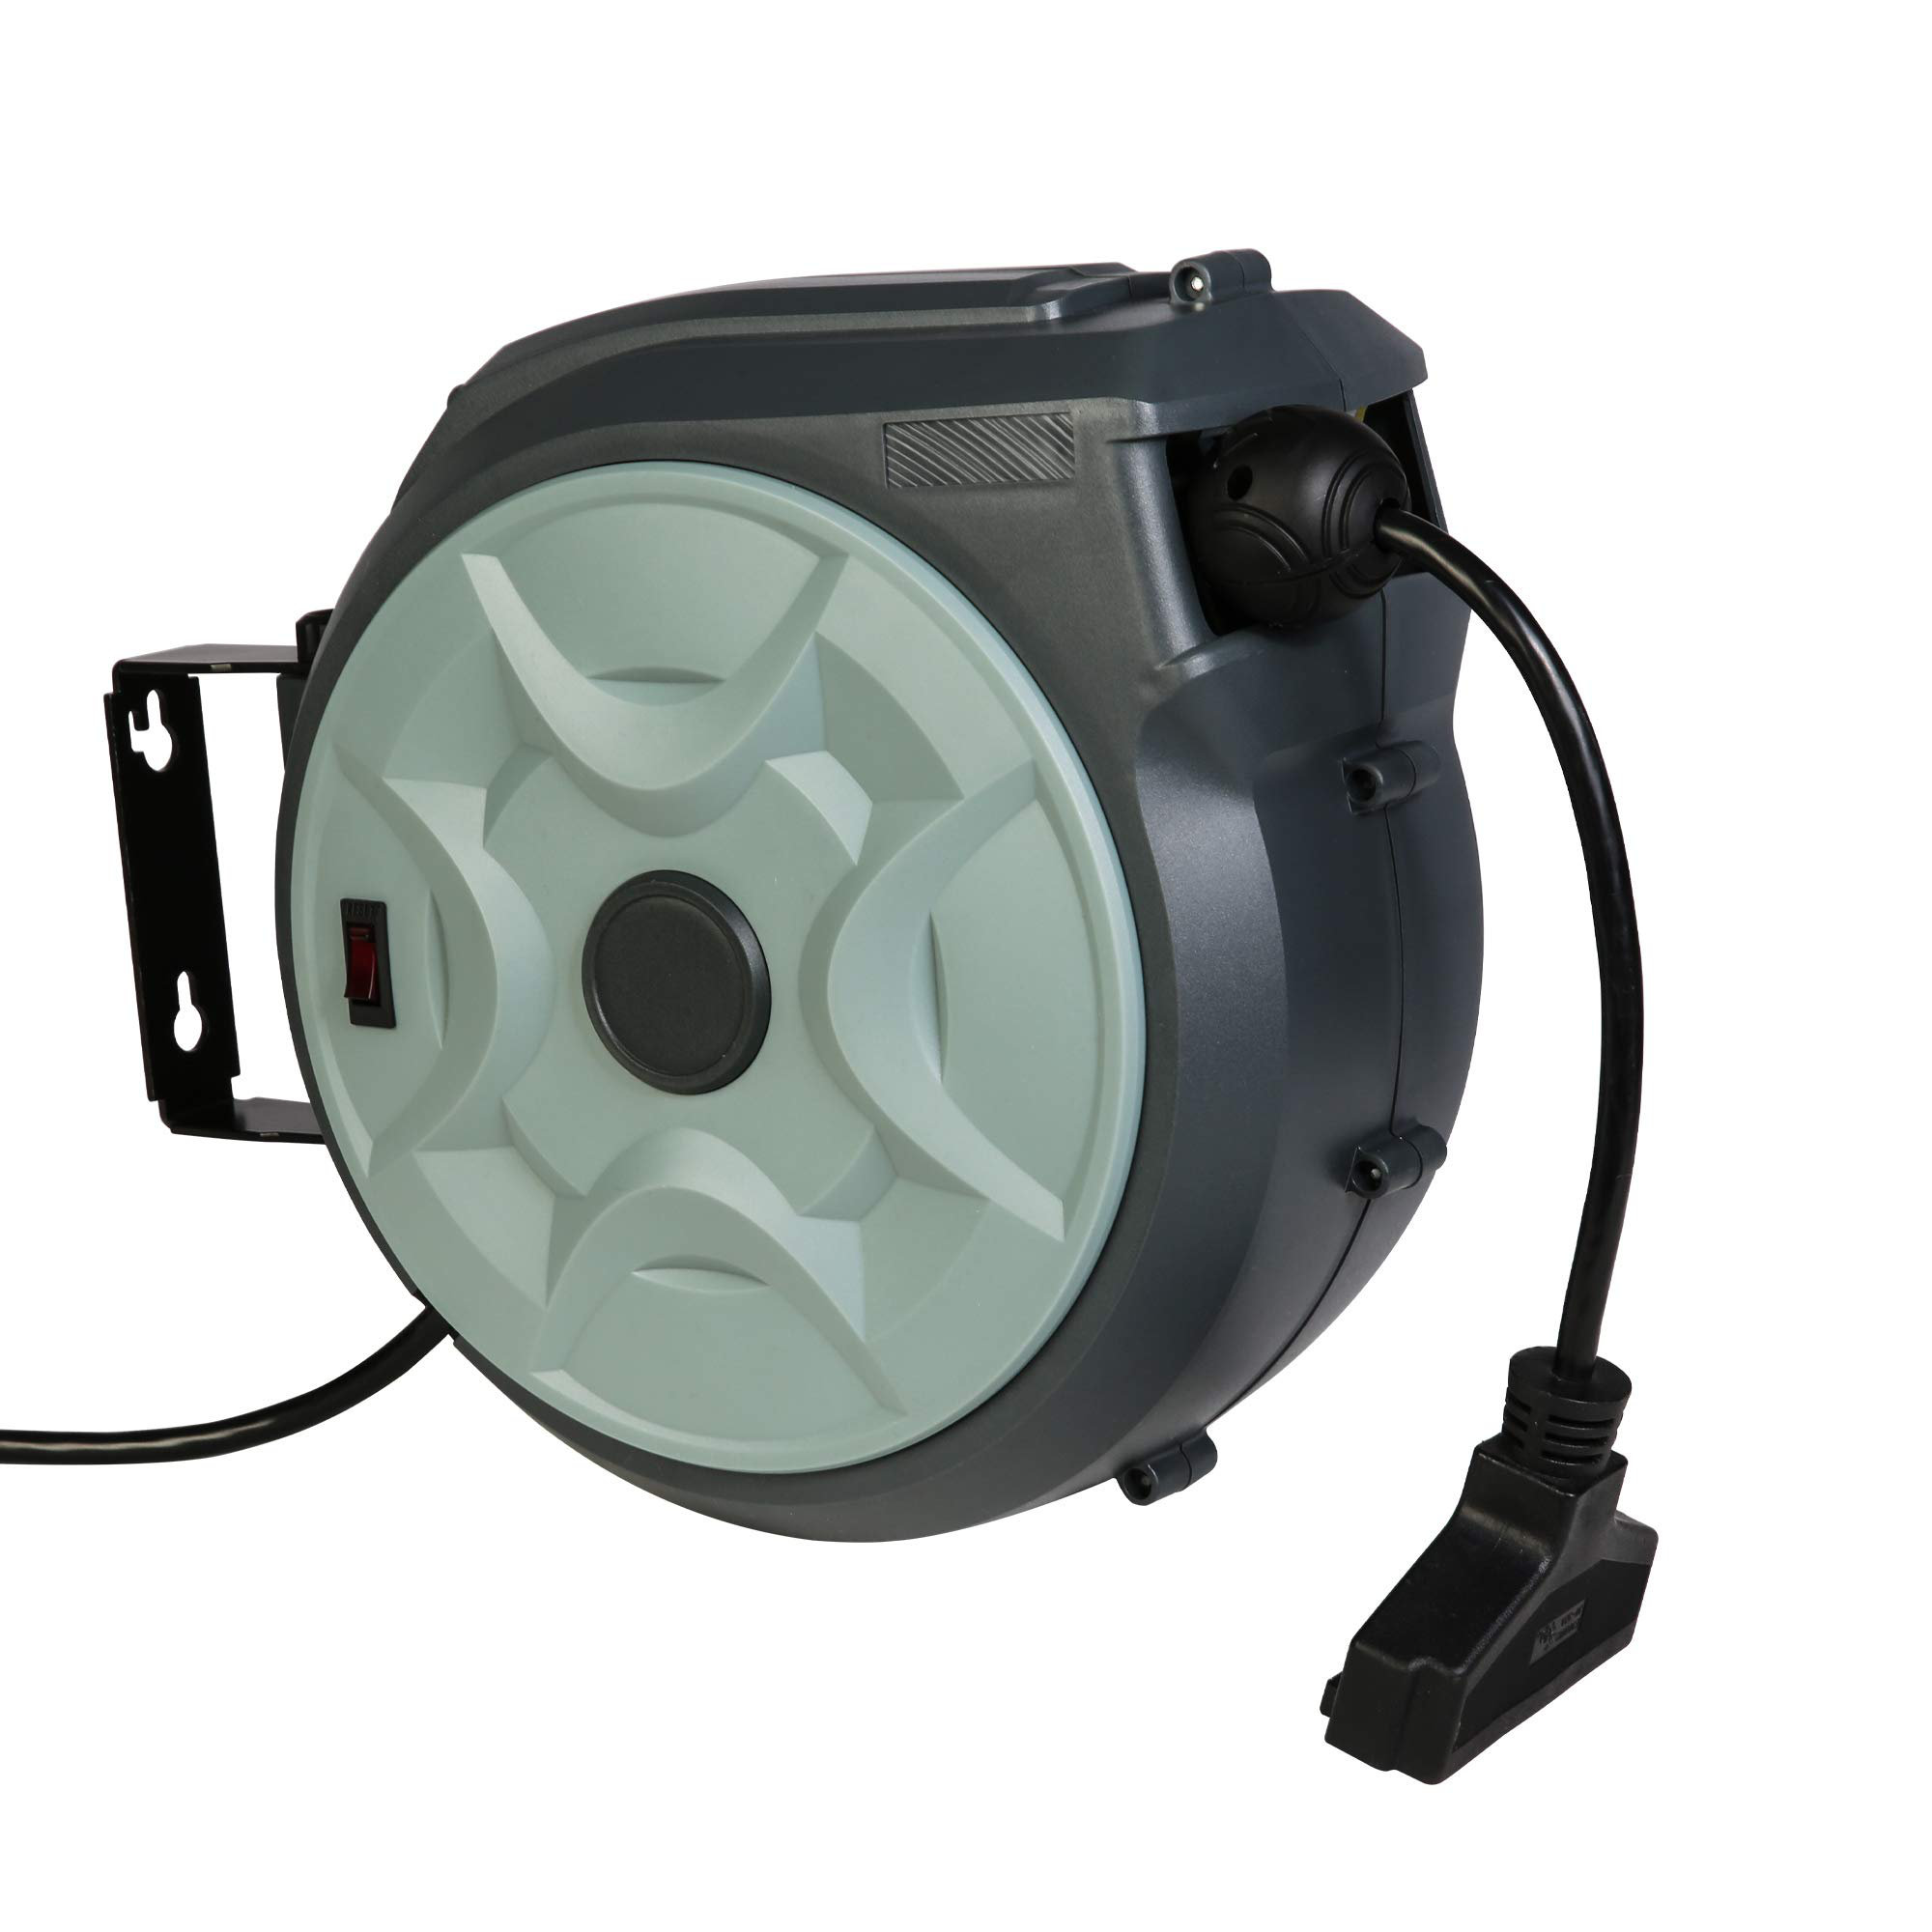 Heavy-Duty Automatic Retractable Extension Cord Reel - 75 FT - Auto-Guide  Rewind